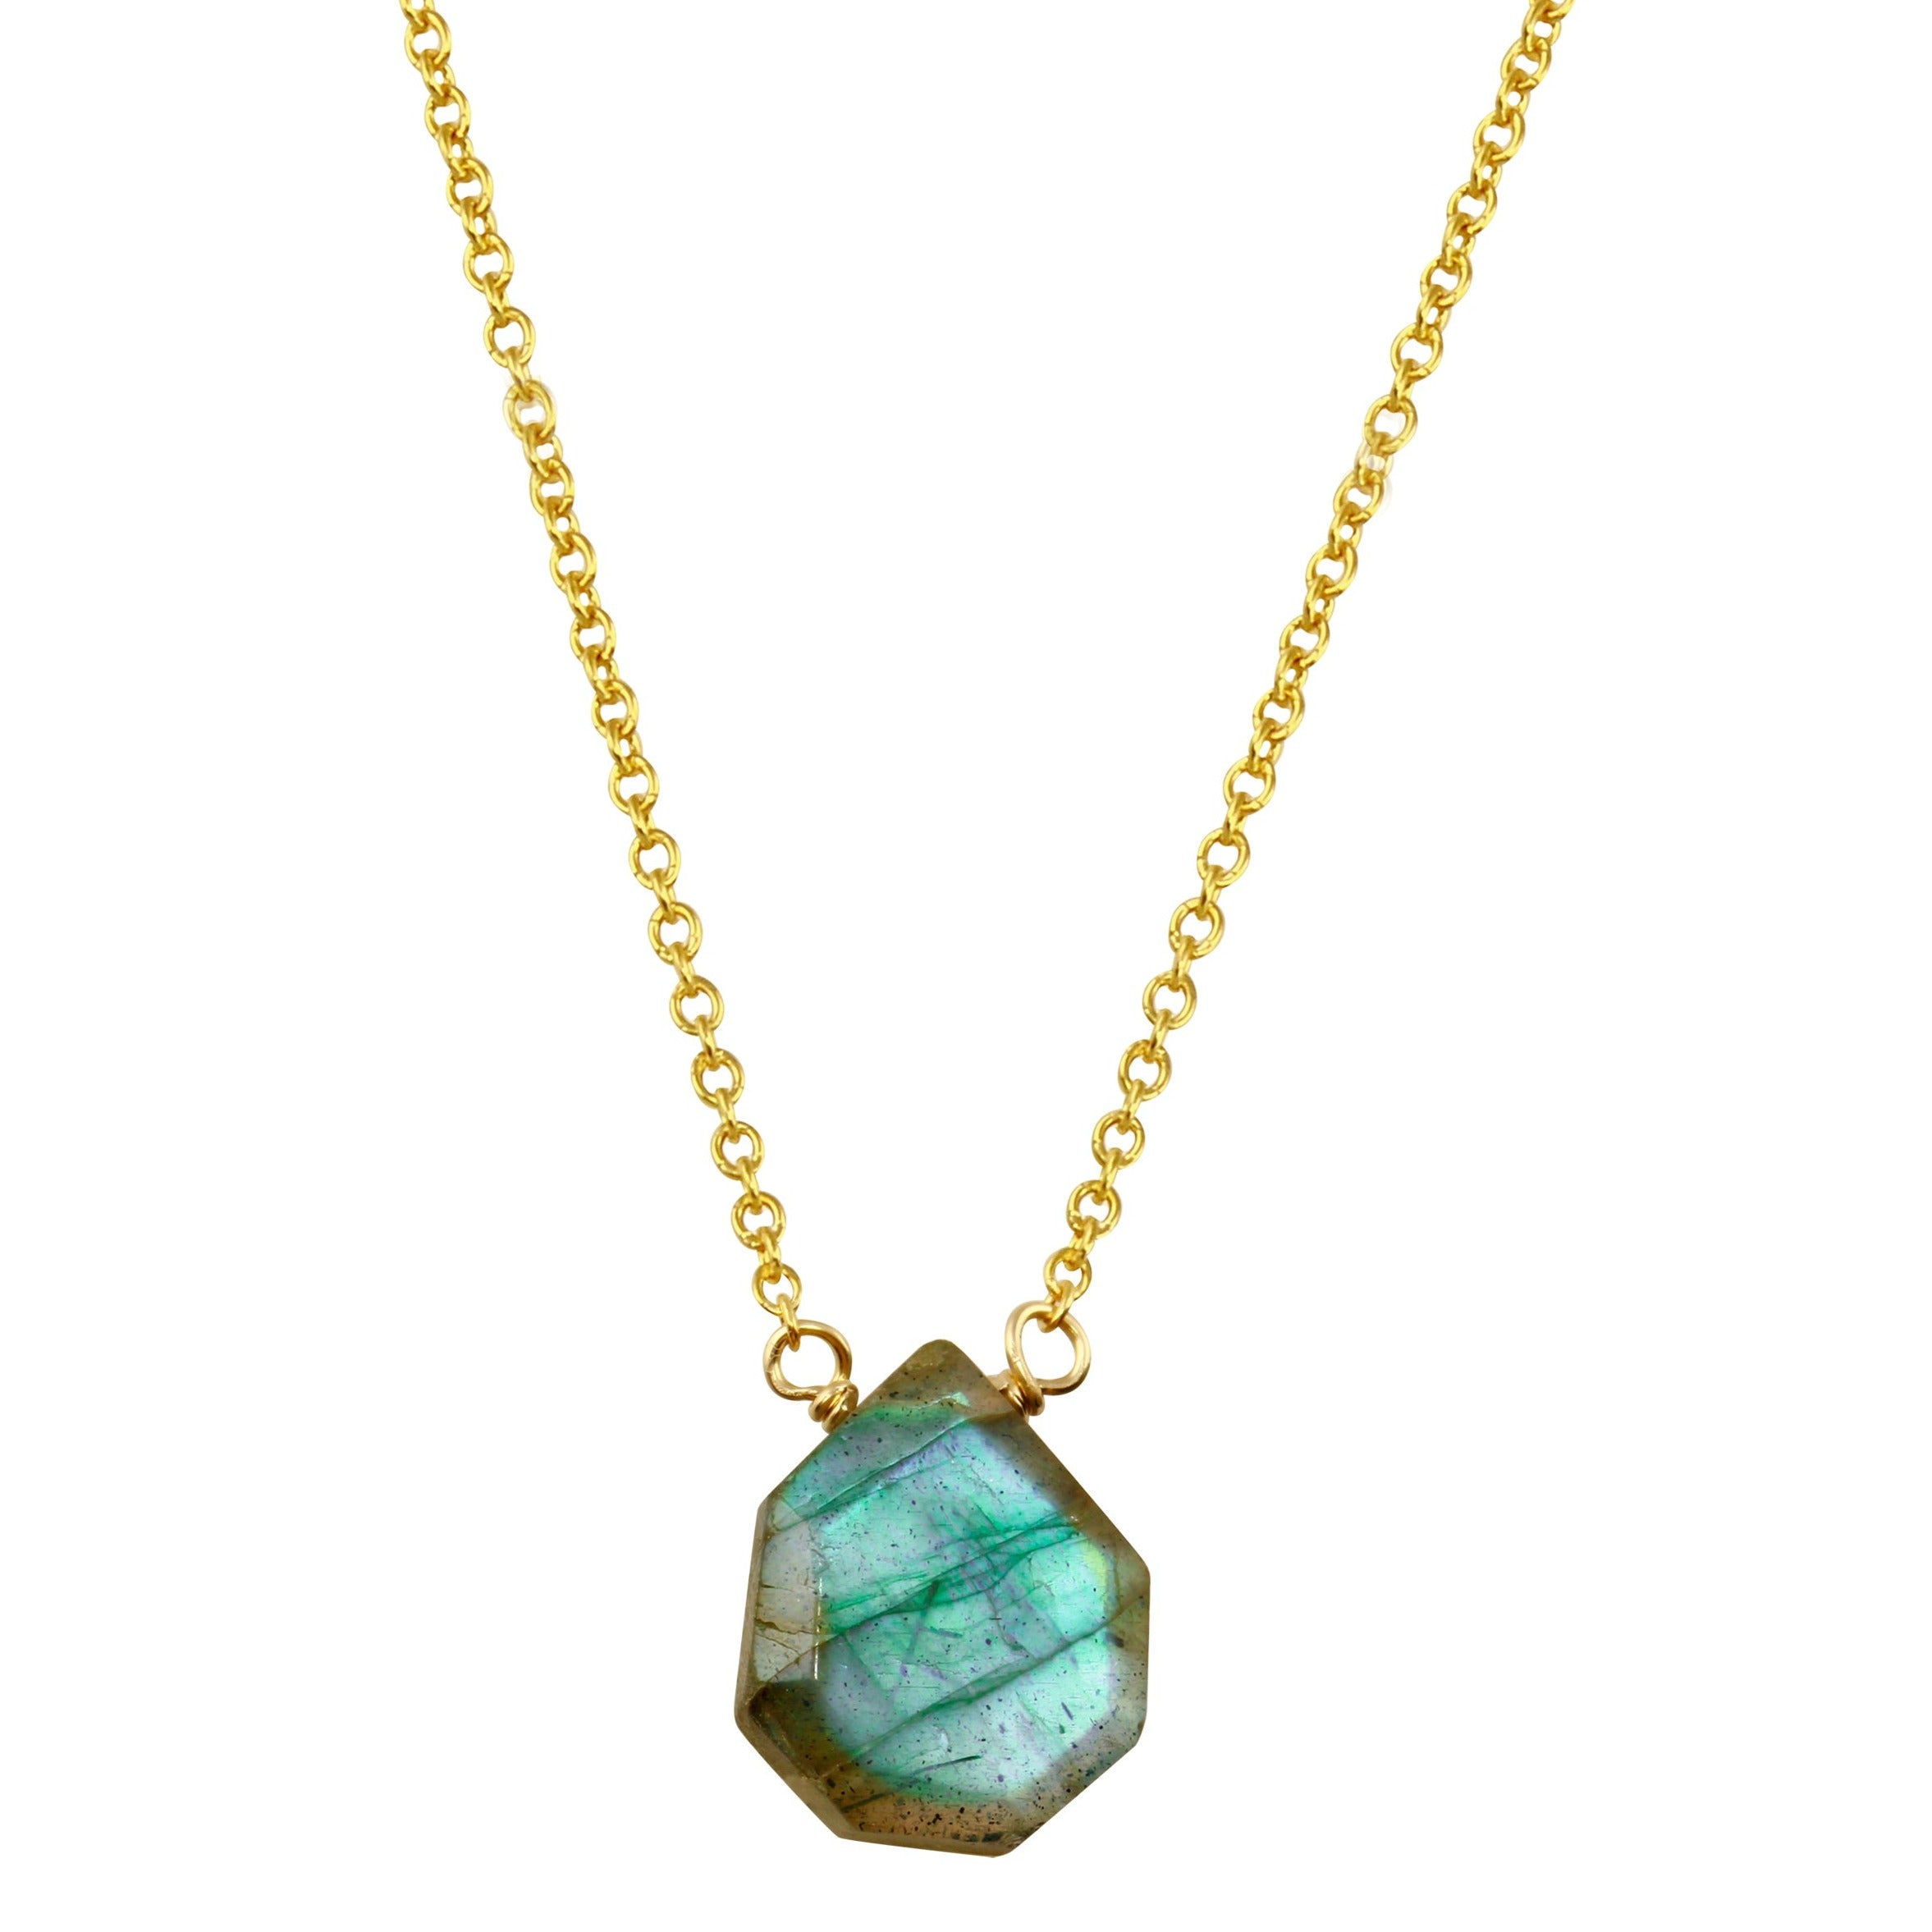 Labradorite flat geo cut necklace - sterling silver or gold filled | Little Rock Collection necklace Amanda K Lockrow